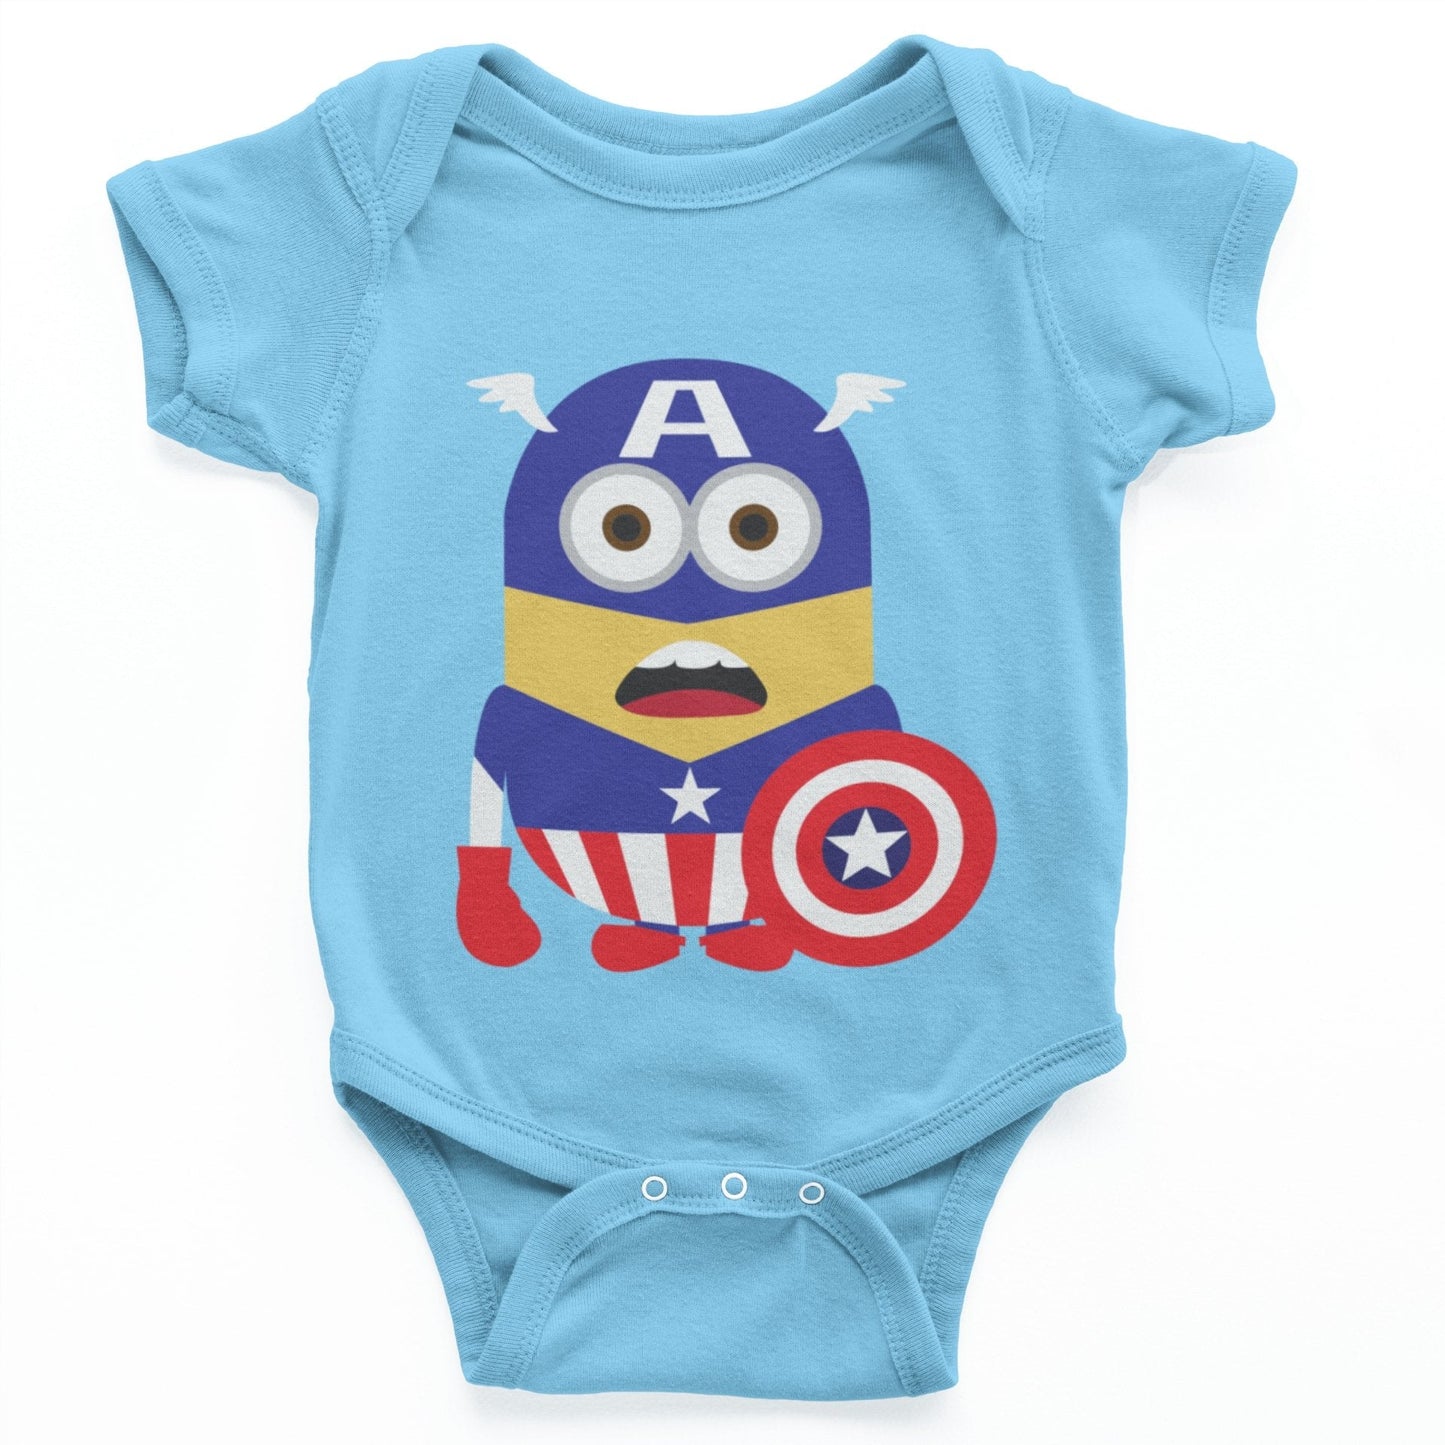 thelegalgang,Captain America Graphic Onesies for Babies,.